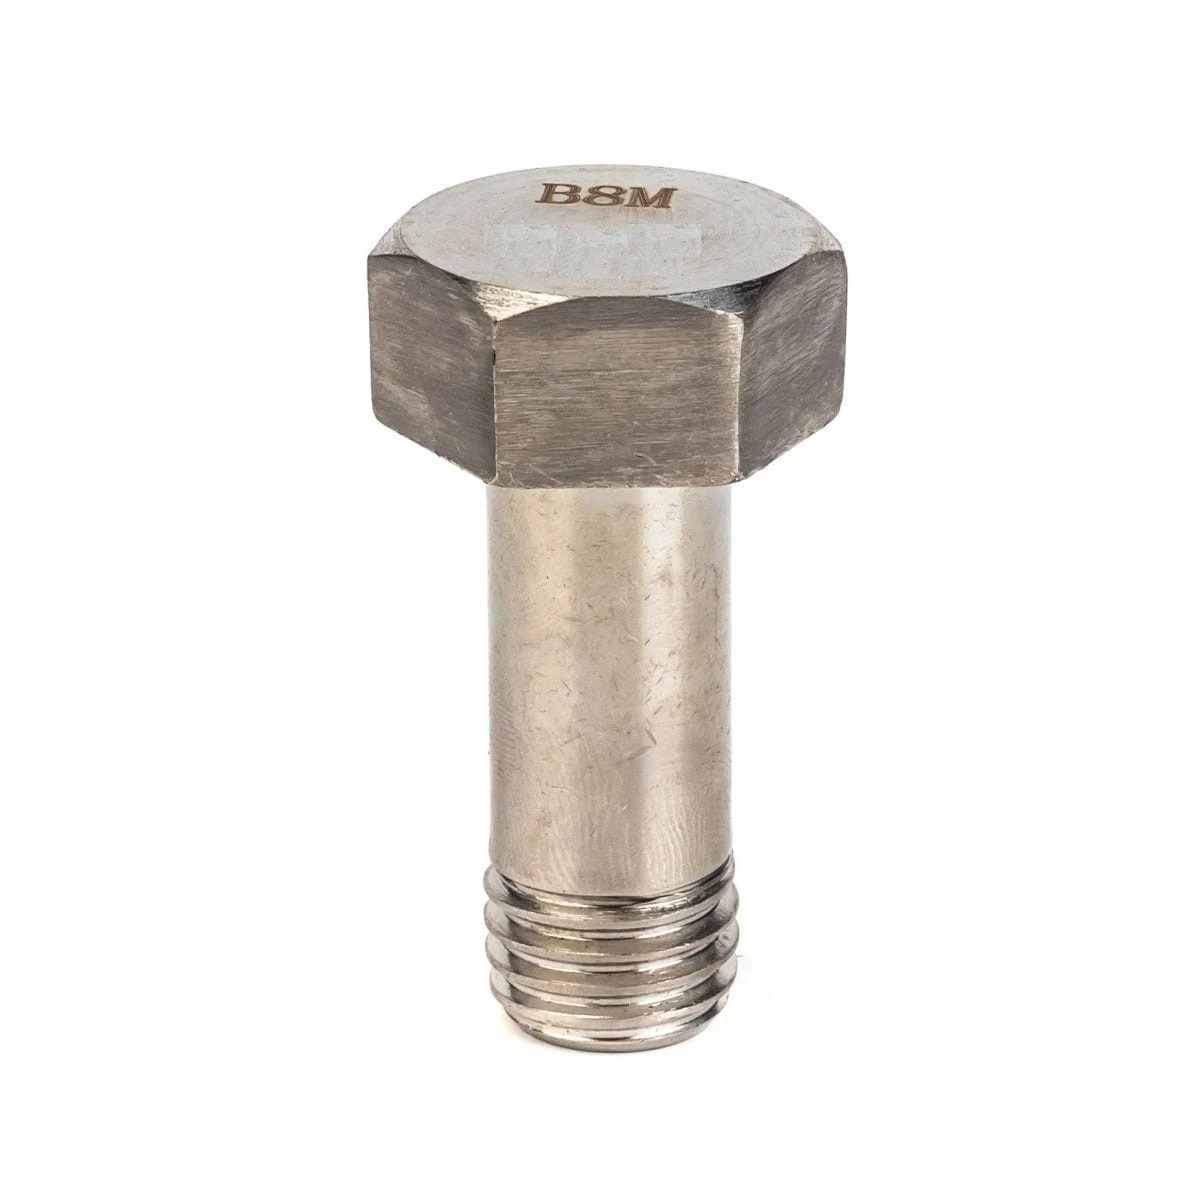 Stainless Steel SS 316 Hex Bolt, Metric Thread, M20, DIN 933